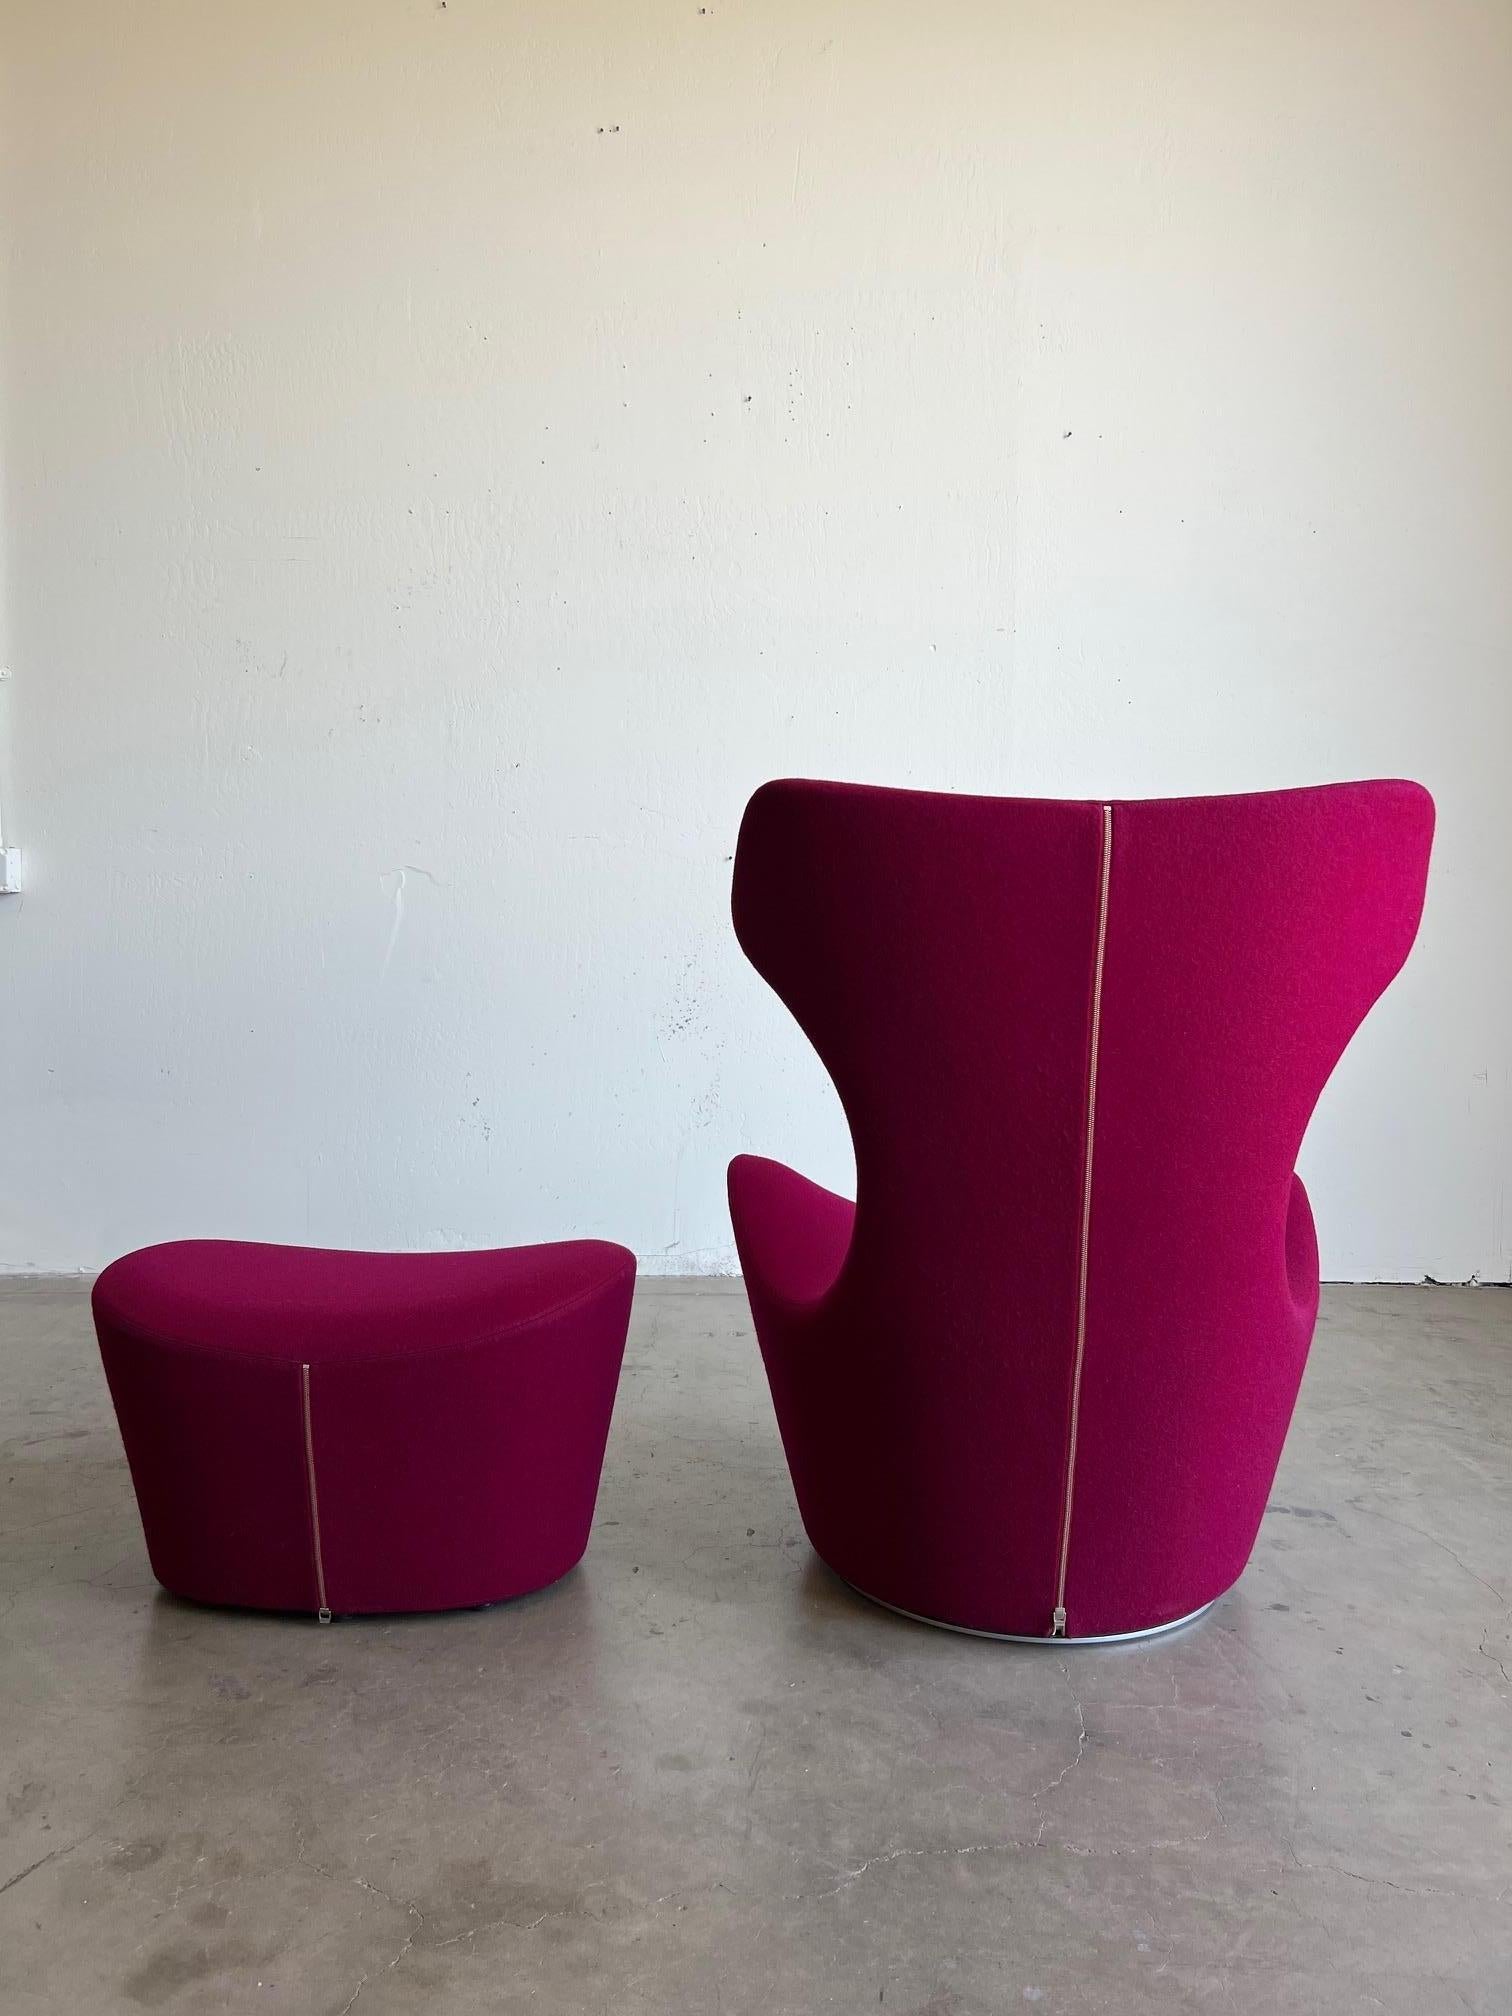 Grande Papilio armchair & ottoman by Naoto Fukasawa for B&B Italia In Soft Wool 

Offered is a wonderful and uncommon example of the B&B Italia Grande Papilio Chair and Ottoman designed by Naoto Fukasawa in a vibrant and soft cashmere wool. This